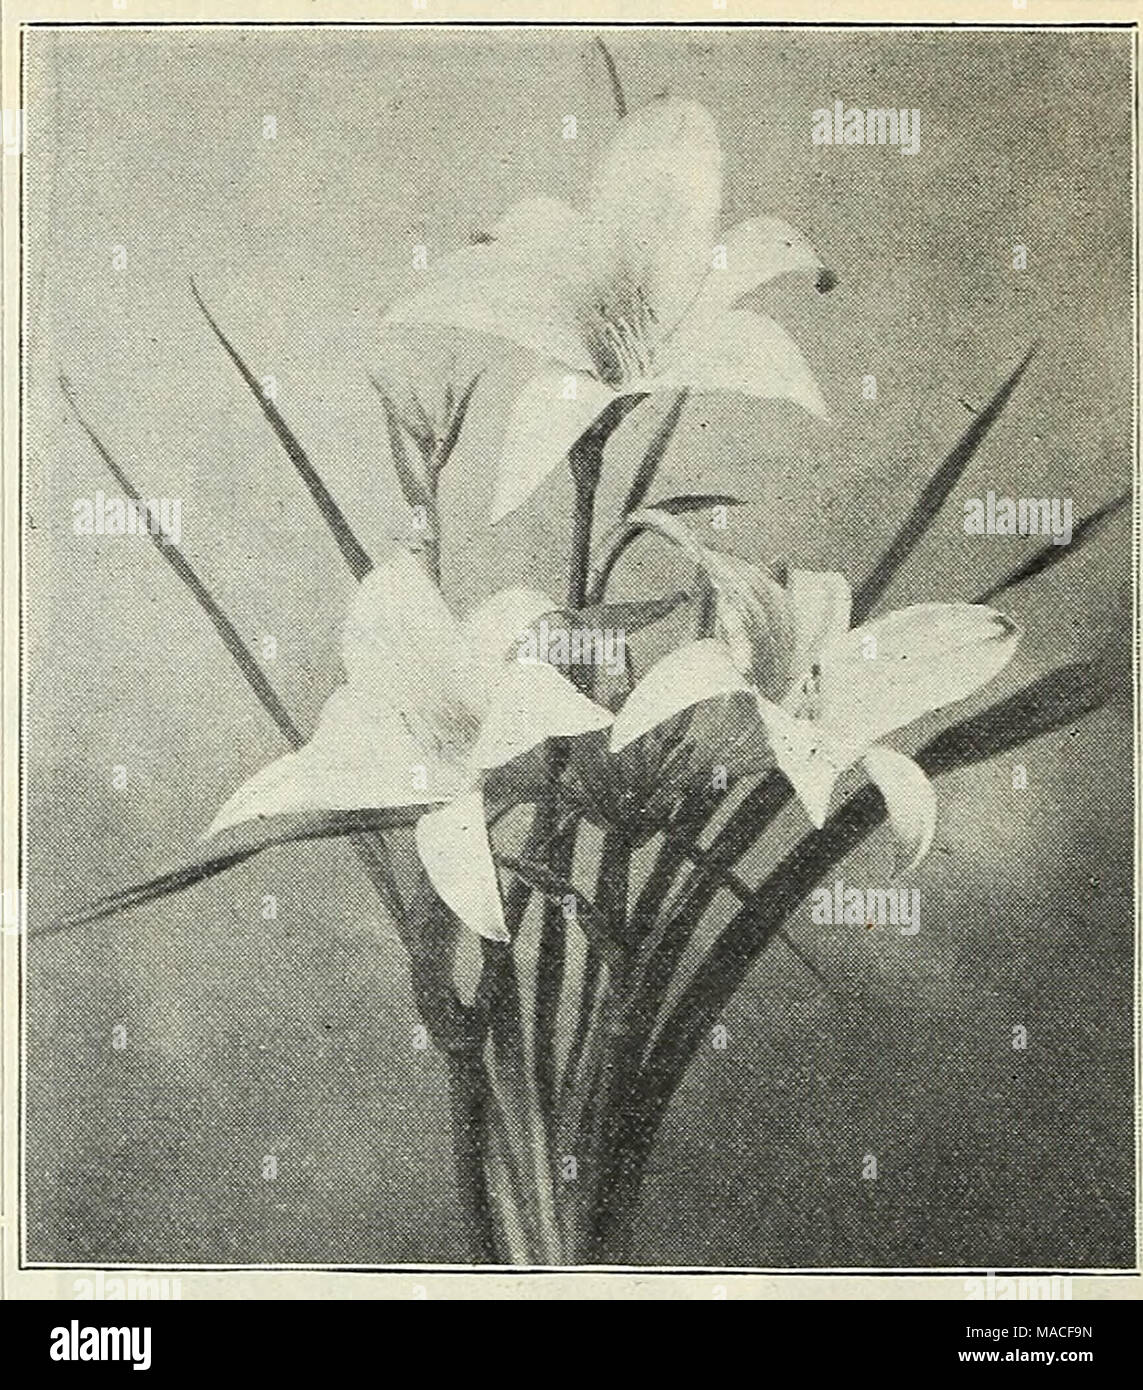 . Dreer's wholesale price list : seeds bulbs plants tools, fertilizers, insecticides, sundries, etc . 46 HENRY A. DEEER, 714 Chestnut Street, Philadelphia, Pa. Gentiana. (Gentian.) Per doz. &quot;Per 100 Andrews! (Closed Gentian) ^o 752i ;?6 co Angustifolia i oogjifJj'S oo Saponaria i oo 8 oo Geraninm. (Crane's Bill.) Sanguineum. Divisions 75 6 oo &quot; Album. Divisions .... 75 6 00 Ibericum. Divisions I 00 8 00 Gilleniat (Bowman's Root.) Trifoliata. Strong divisions I 00 8 00 Globnlaria. Trichosantha i 50 12 00 GypSOphila. (Baby's Breath.) Acutifolia. Strong plants 75 6 00 Paniculata. Strong Stock Photo